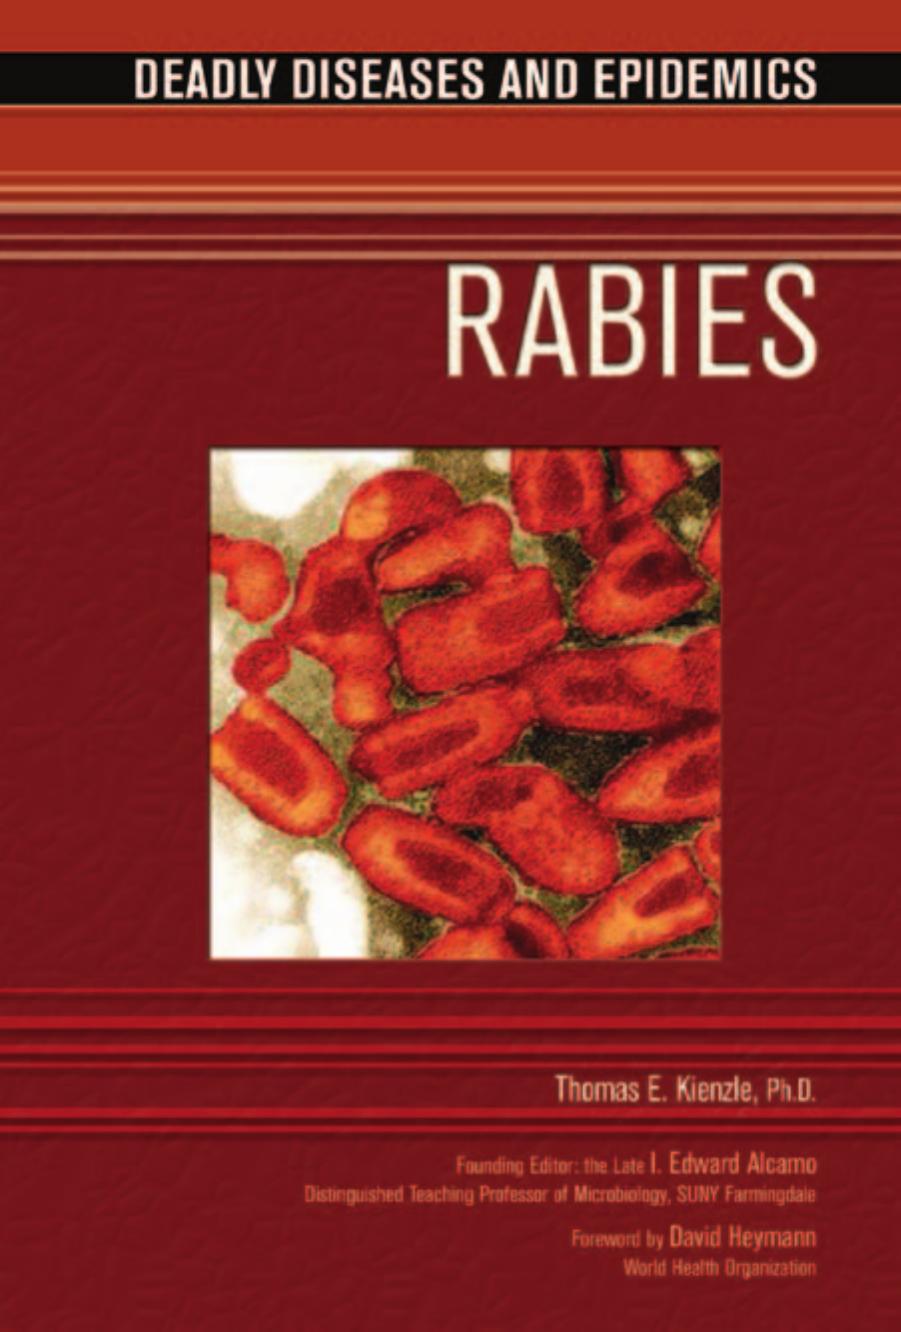 Rabies (Deadly Diseases and Epidemics) 2007